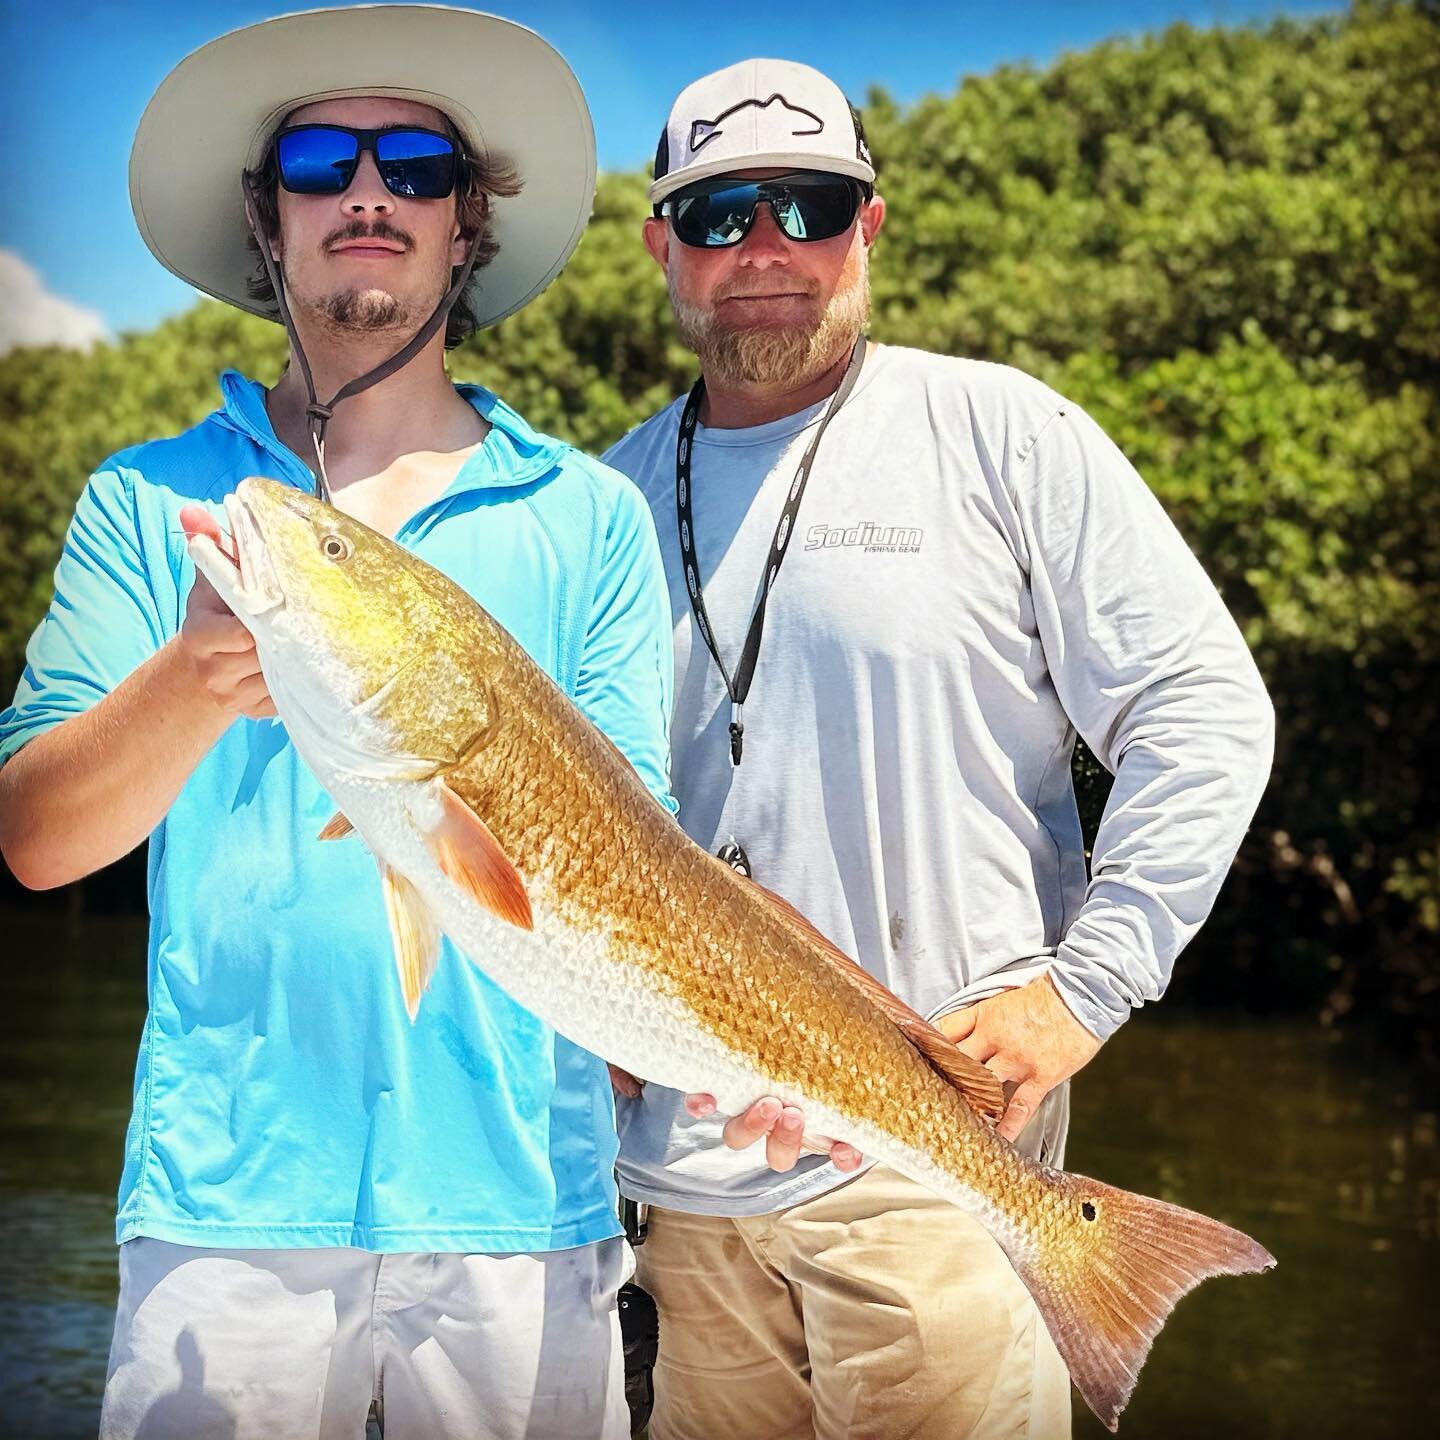 Landon with a nice 35 incher this afternoon in some and hot shallow water. #crystalriver #captjameskerr
#crystalriverflatsfishing #fishing #naturecoast #seatrout #snook  #visitflorida #sodiumfishinggear #crystalriverfishing #inshorefishing #redfish 
